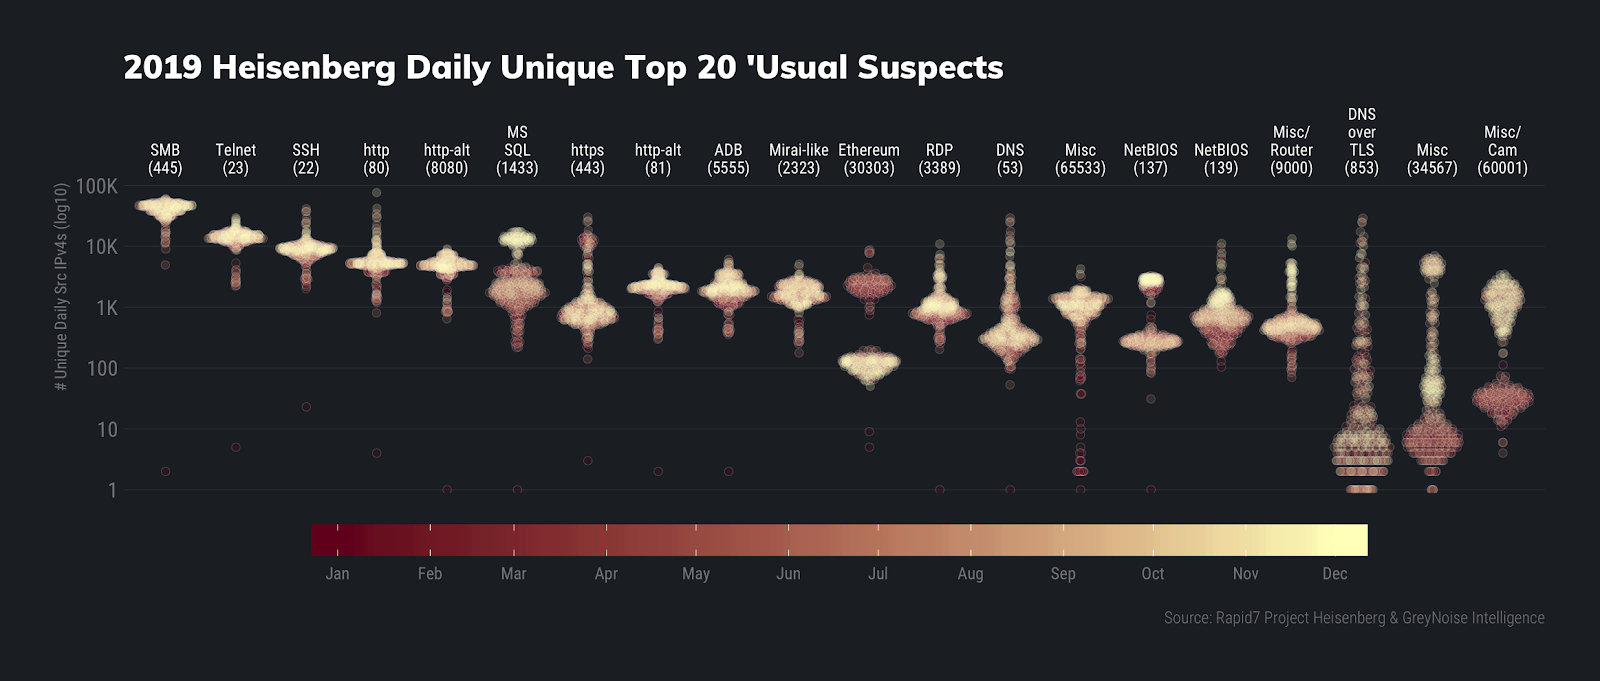 2019-heisenberg-daily-unique-top-20-usual-suspects